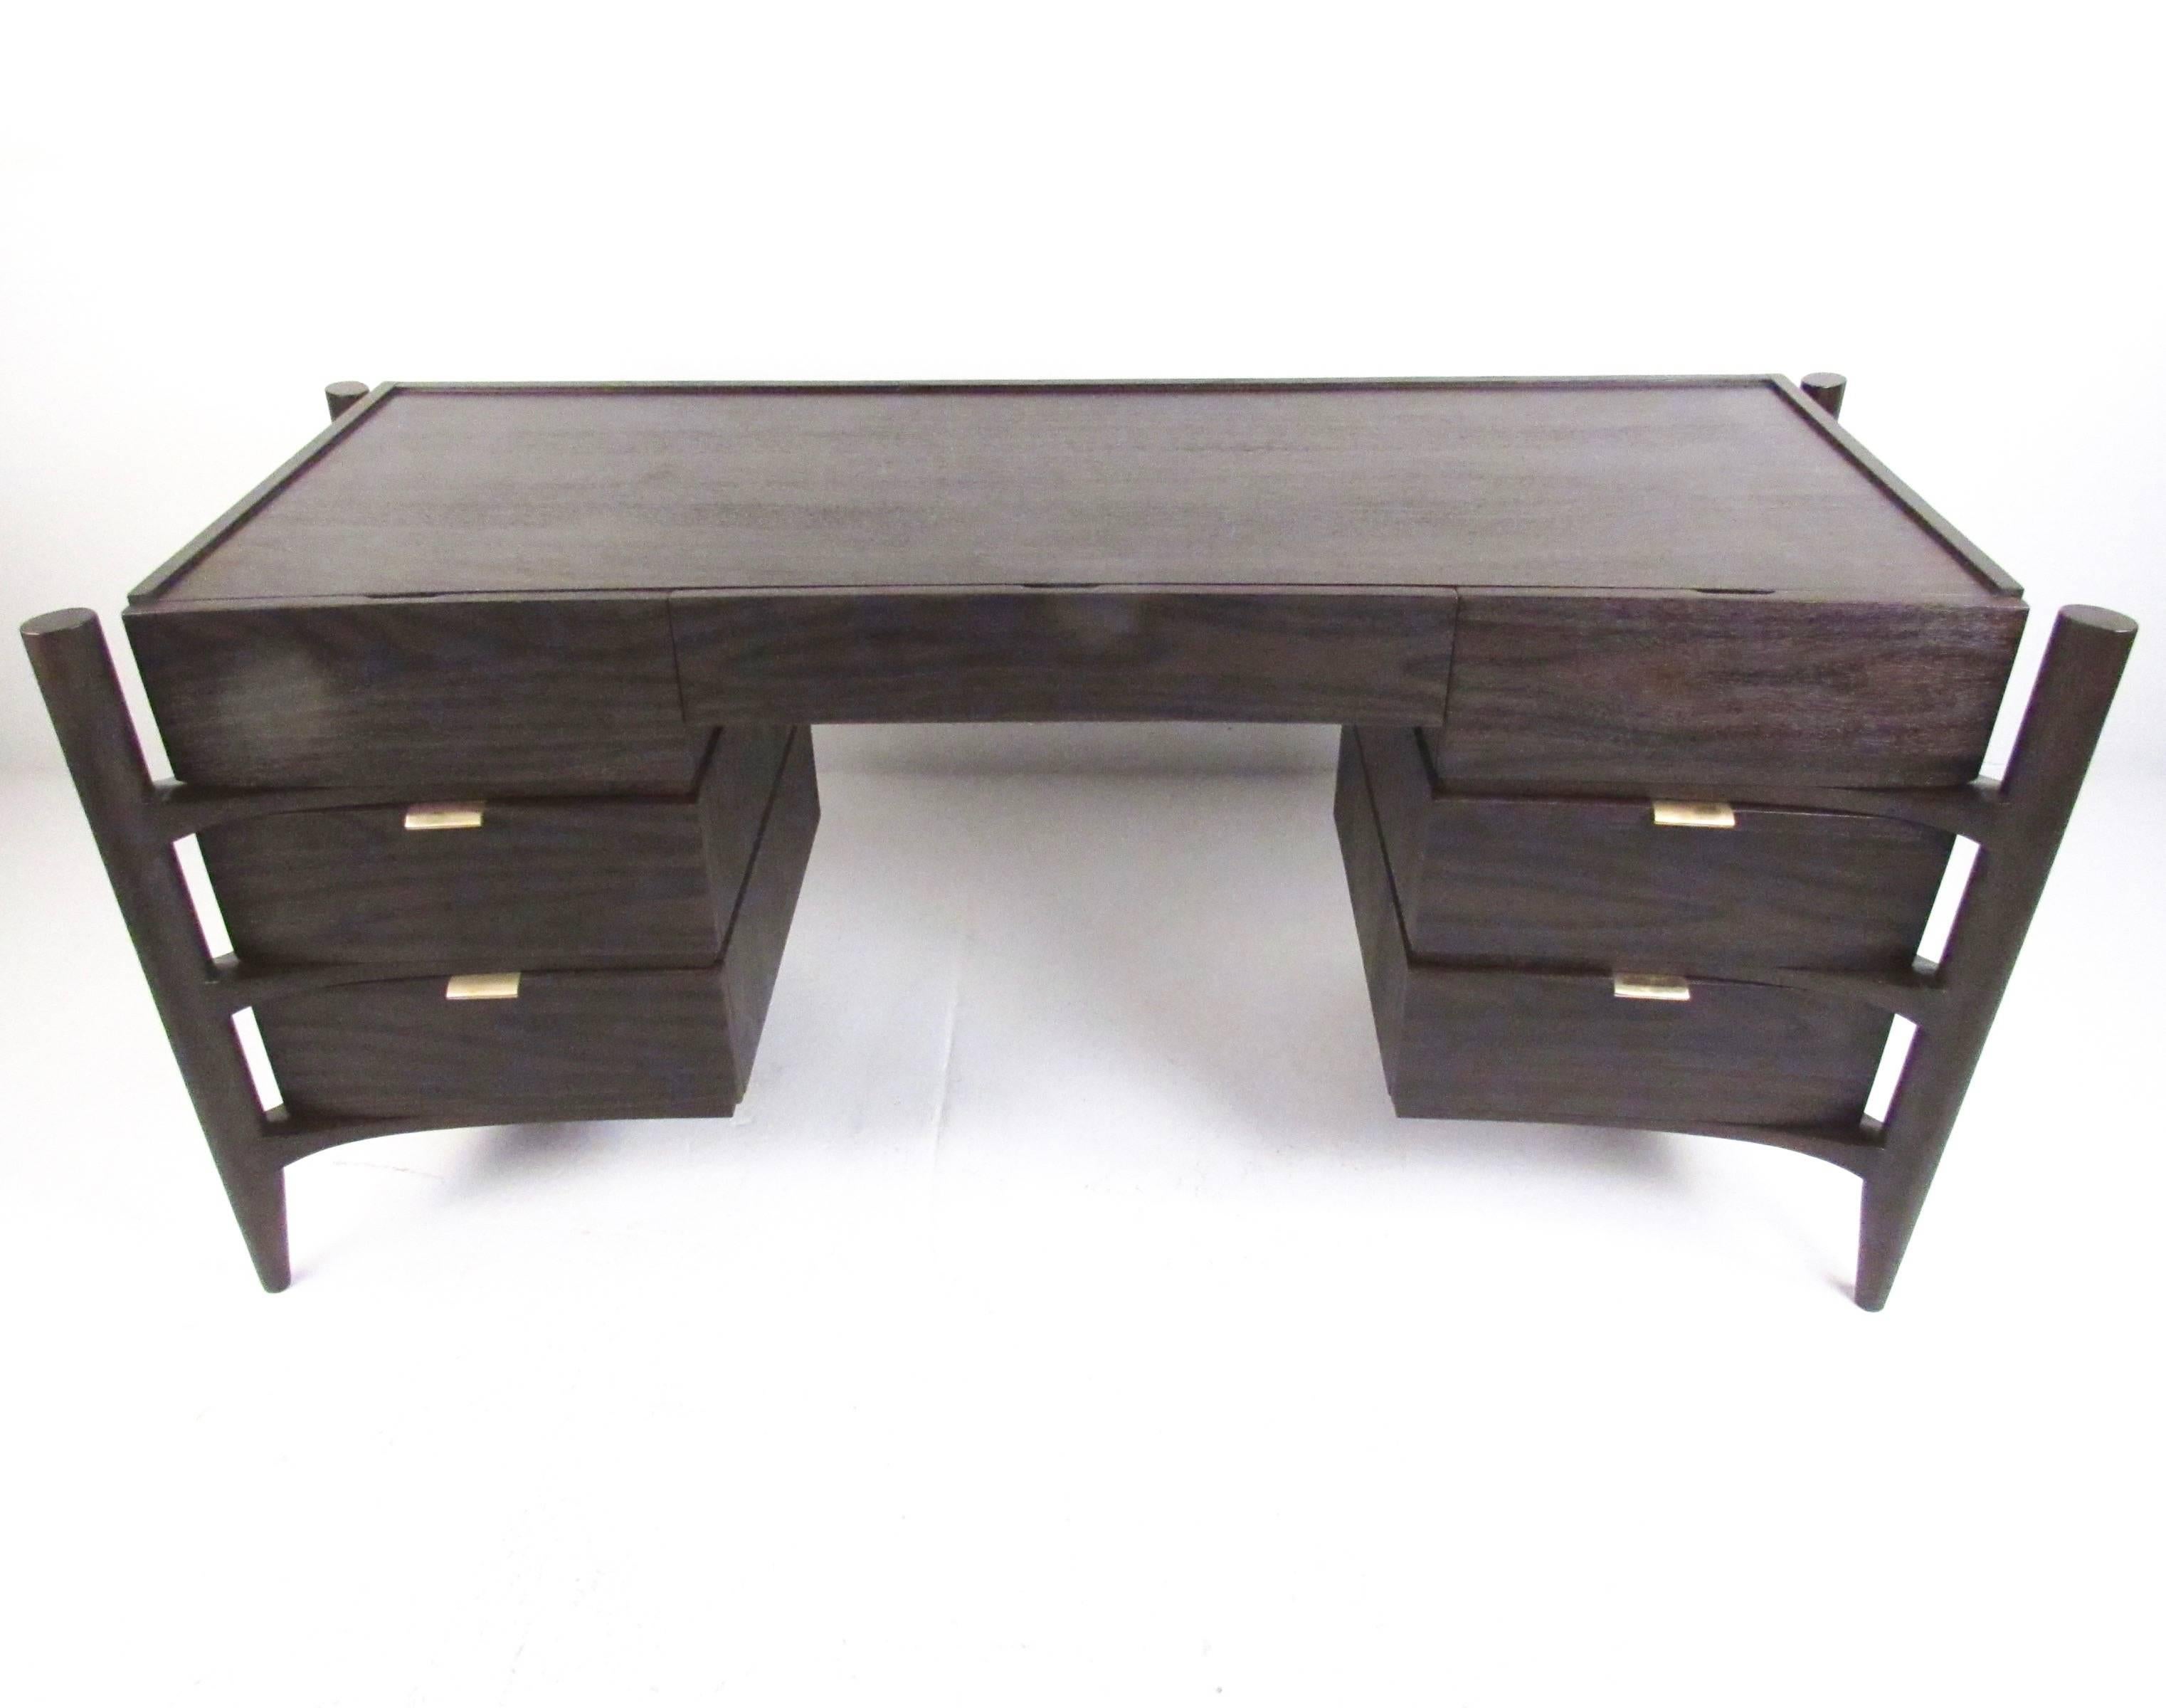 This stylish modern writing desk features unique sculpted design similar to the of Edmond Spence. The piece offers seven spacious drawers, striking wood grain finish; metal drawer pulls, and makes a beautiful addition to any home or office. Please